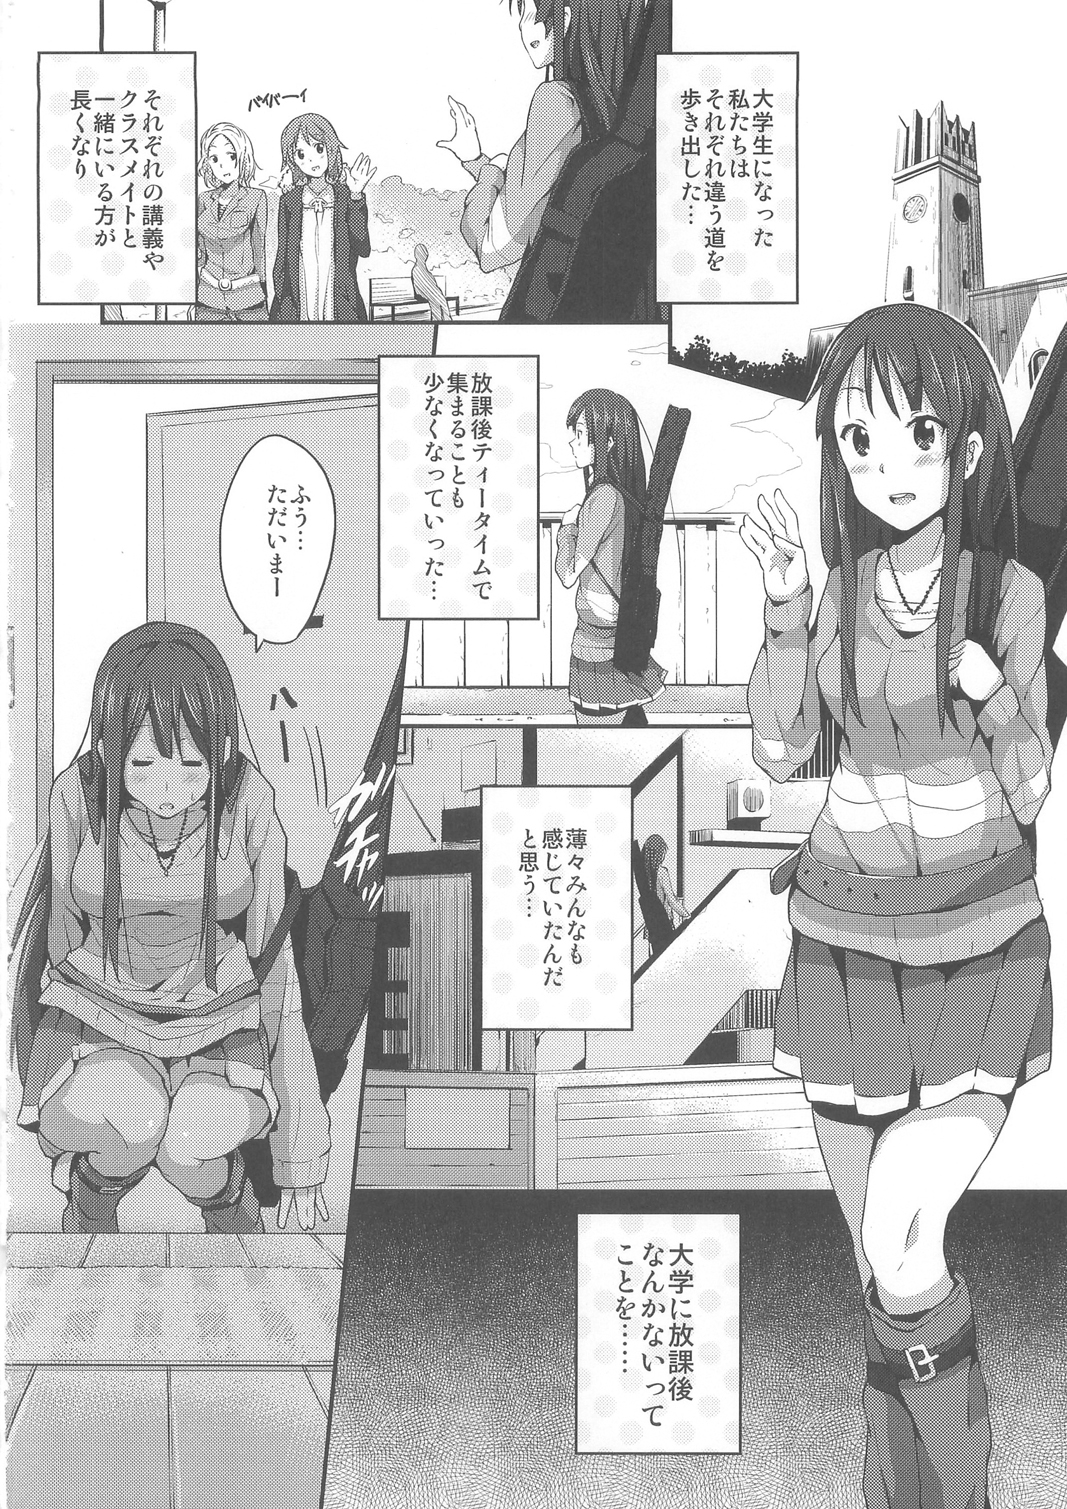 (C79) [Galley (Ryoma)] Miopero (K-On!) page 4 full